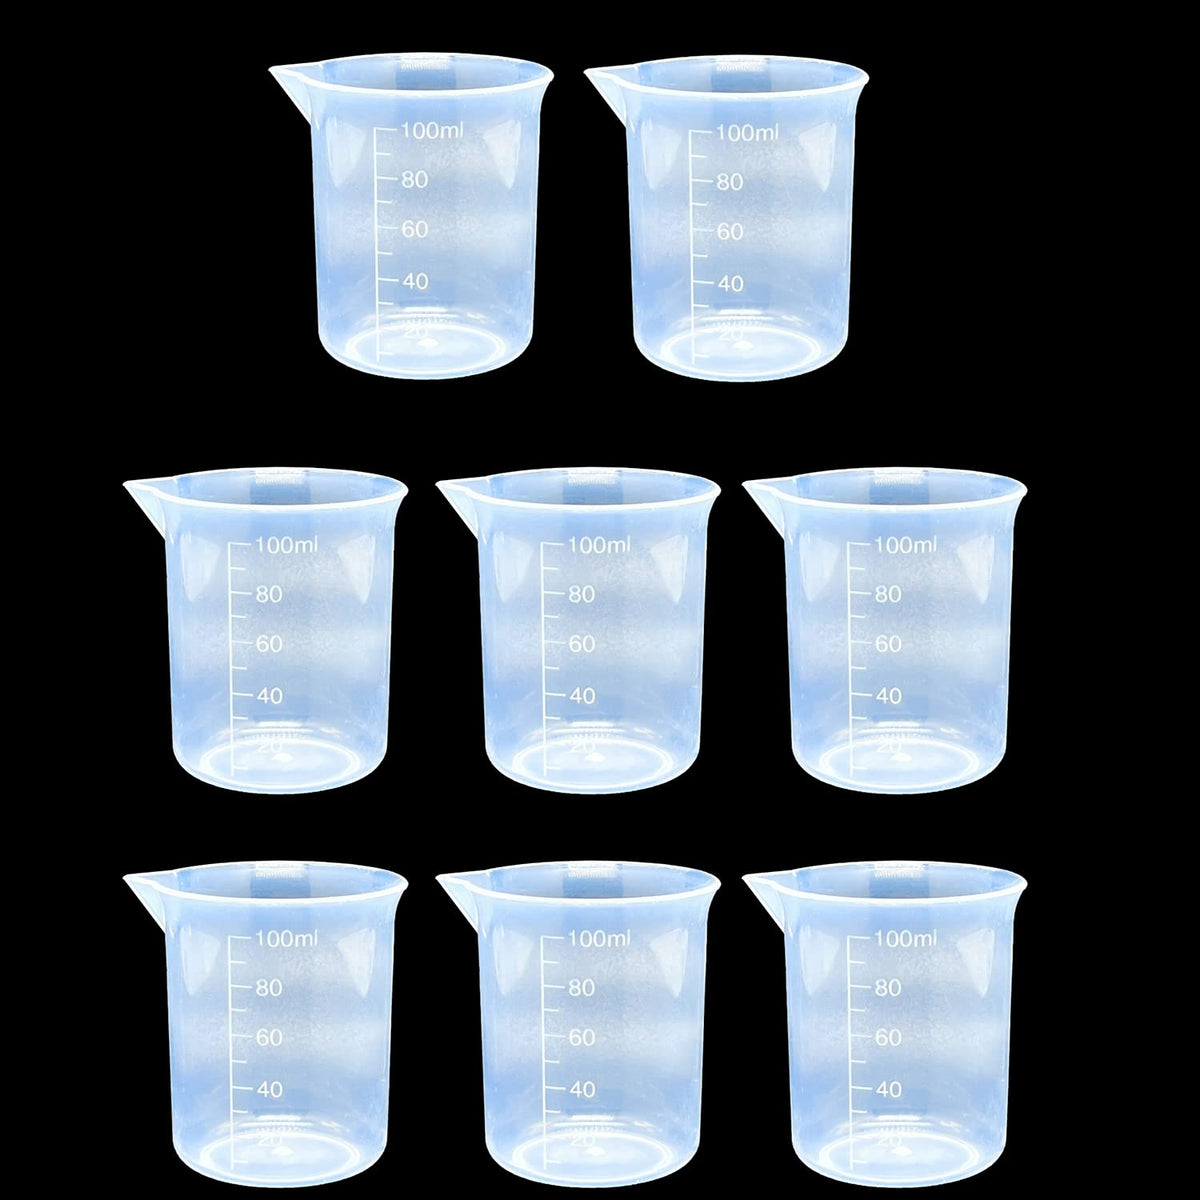 16 Oz - 2 Cup 450 ML - Disposable Measuring Cups - Plastic Graduated Mixing  Cups - for Mixing Resin/Epoxy, Paint, Cooking, Baking and Crafts (12 pack)